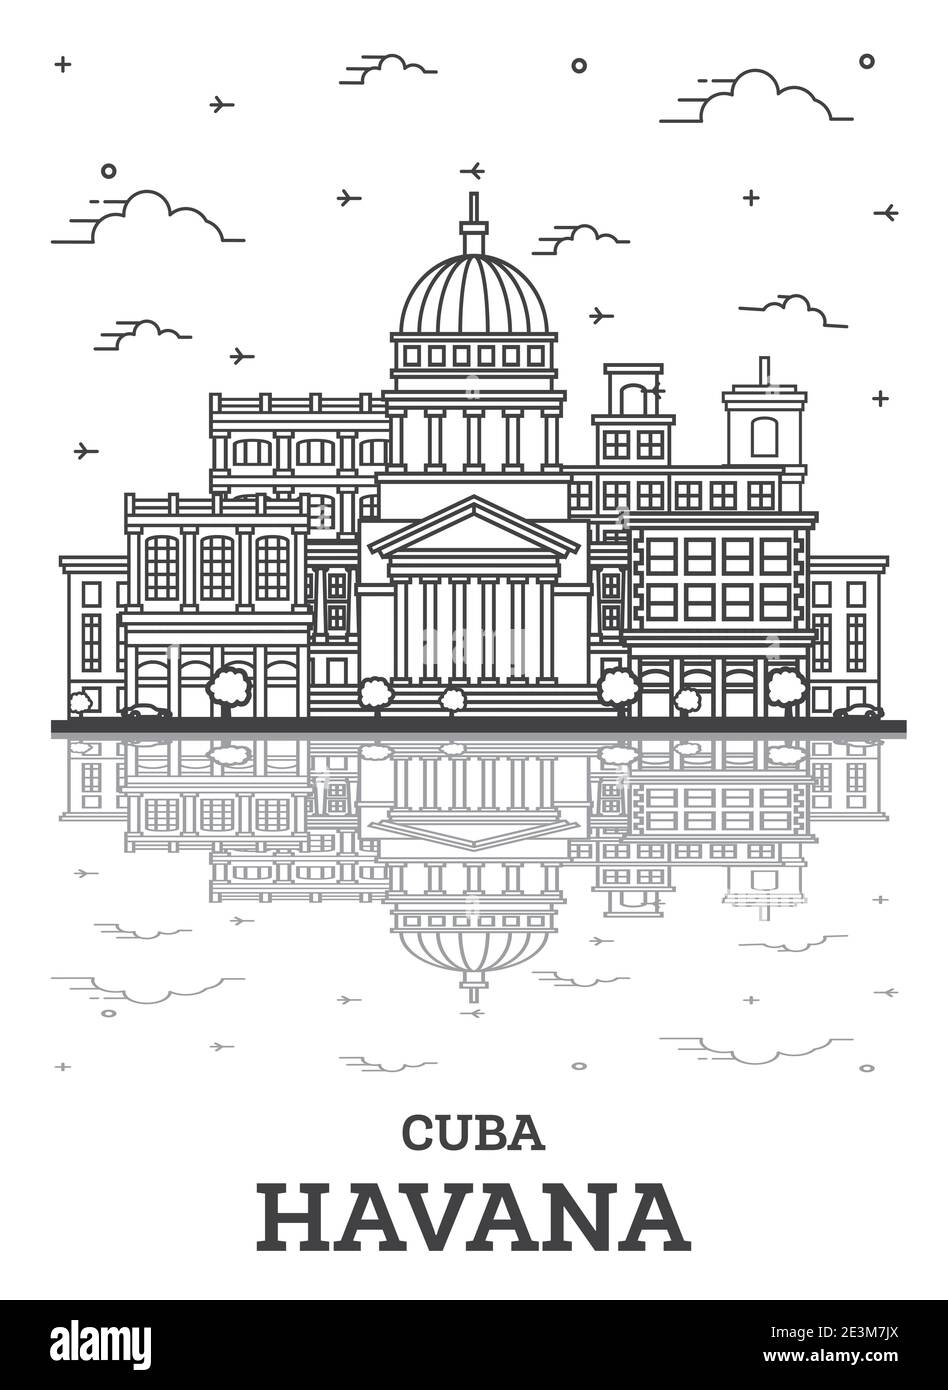 Outline Havana Cuba City Skyline with Historic Buildings and Reflections Isolated on White. Vector Illustration. Havana Cityscape with Landmarks. Stock Vector